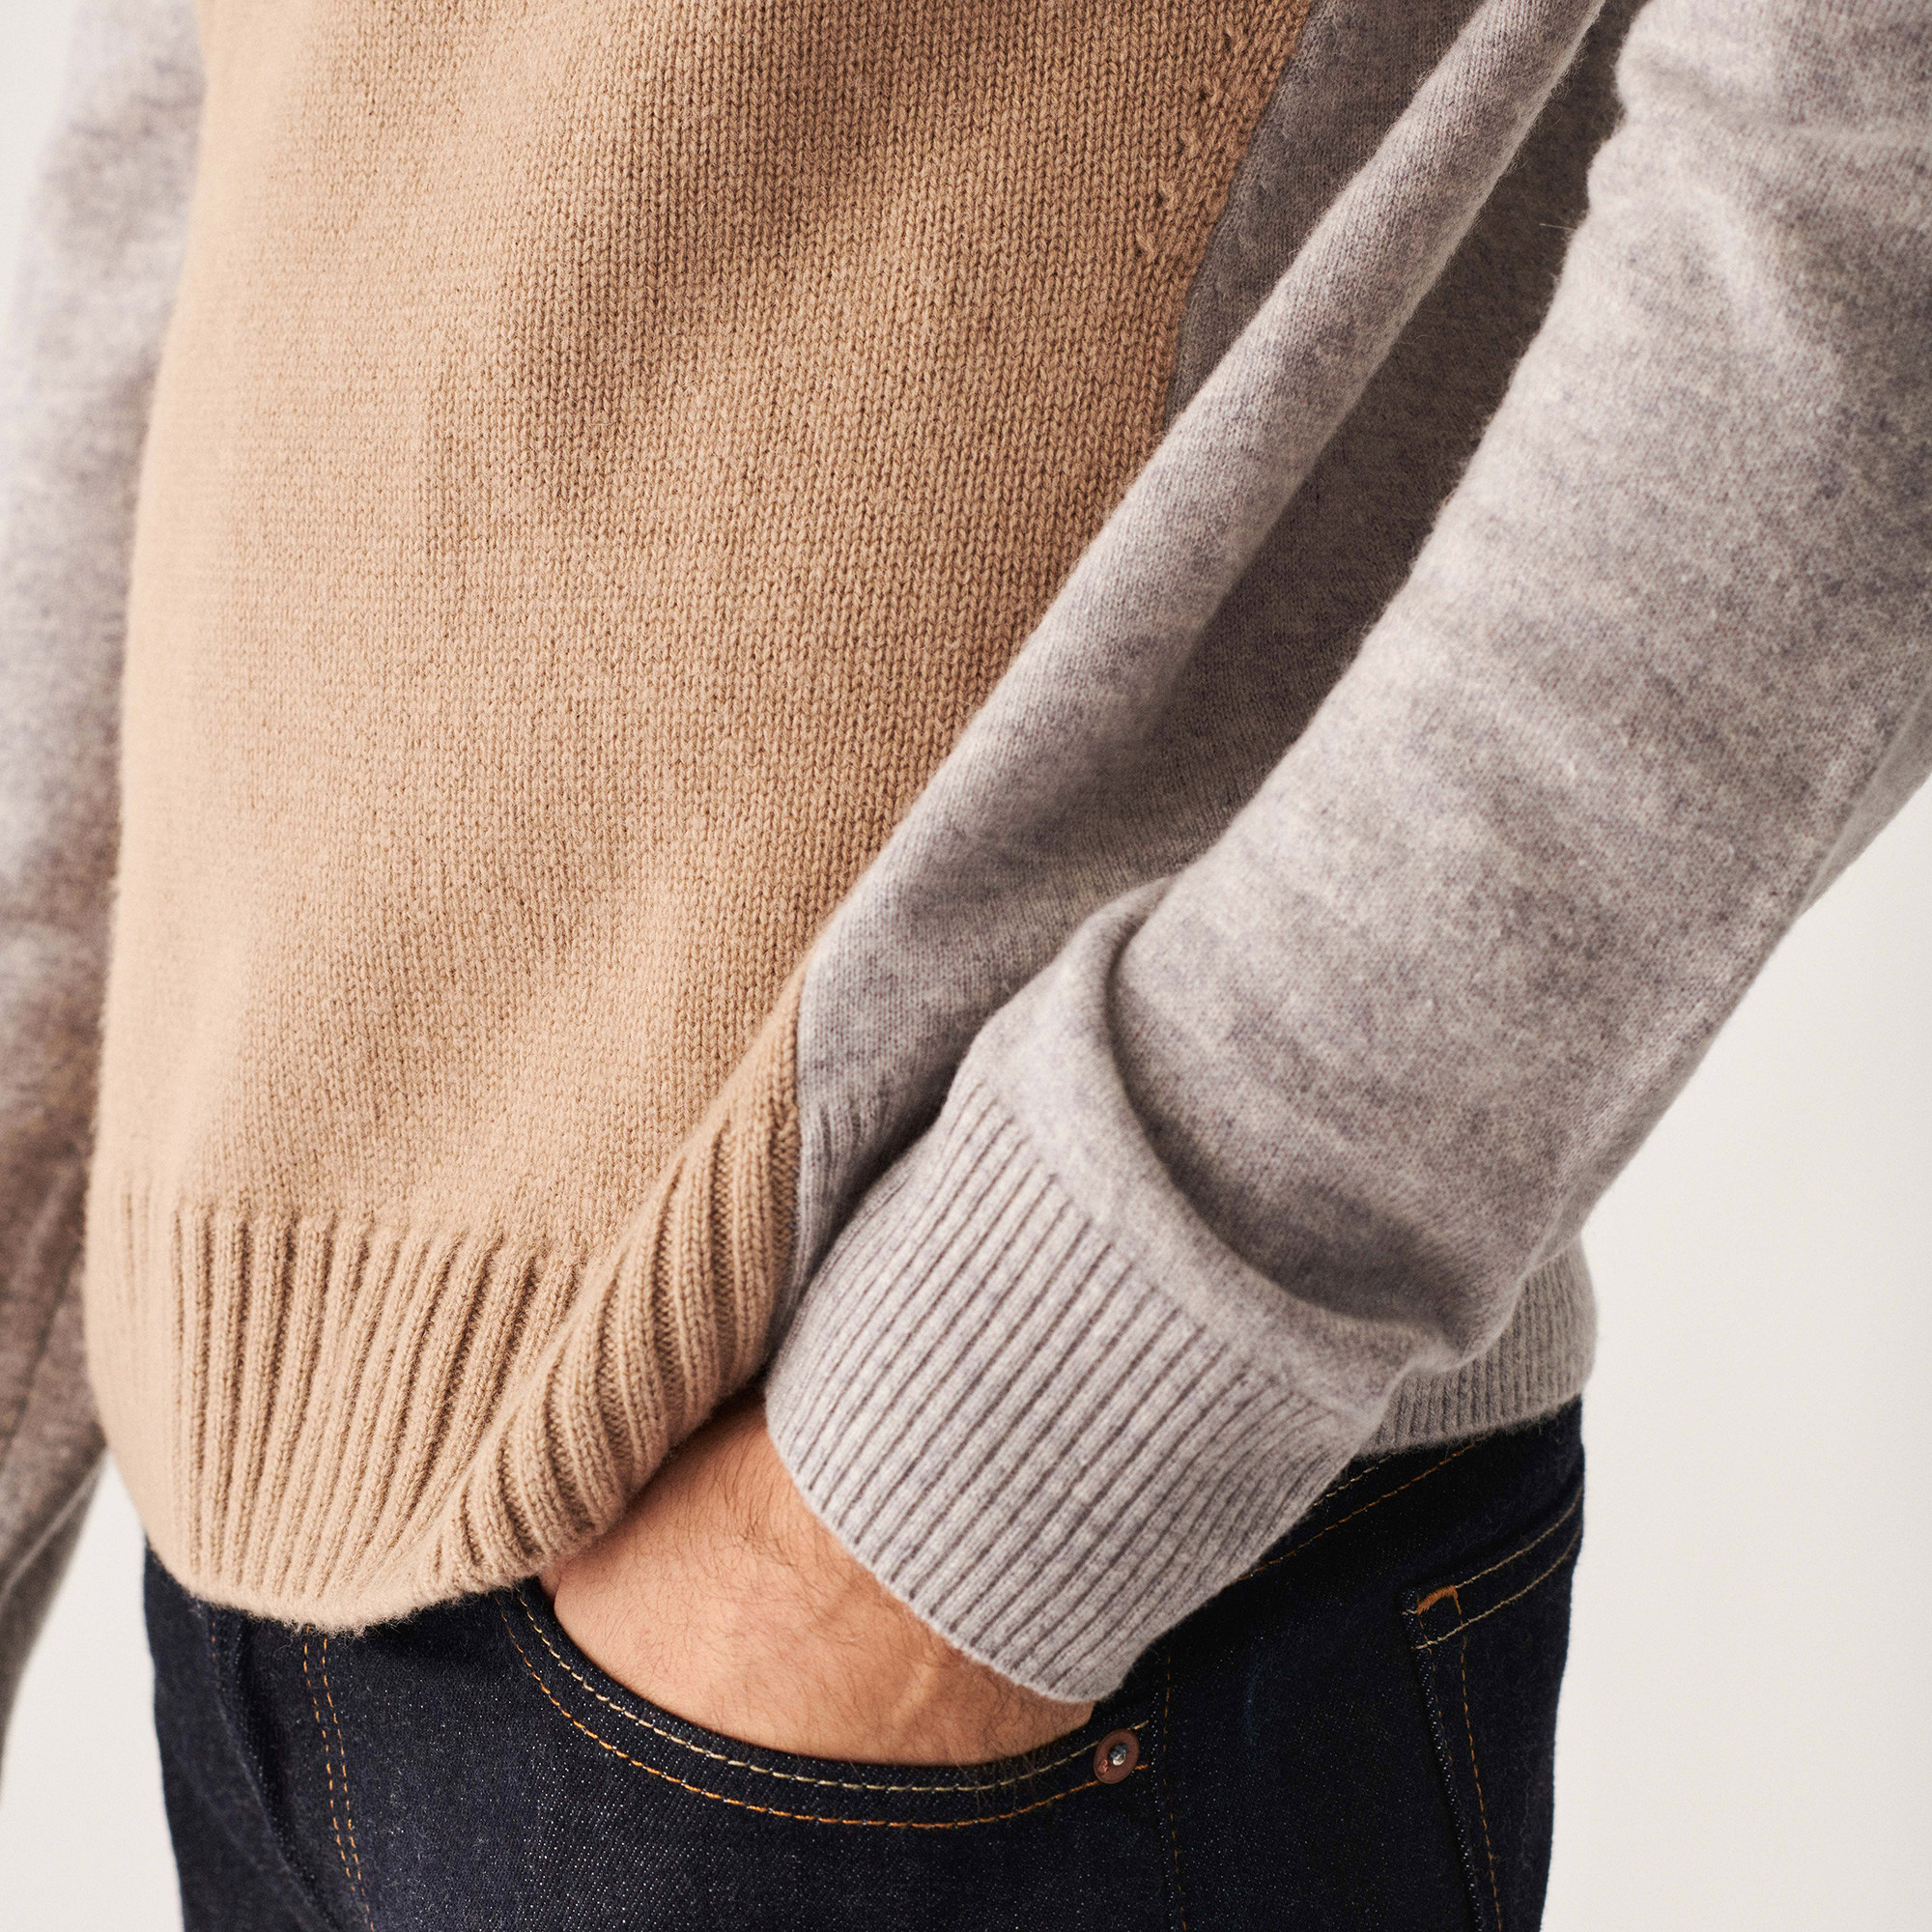 https://us.montagut.com/25586-thickbox_default/two-tone-cashmere-sweater-with-raglan-sleeves-amalfi.jpg